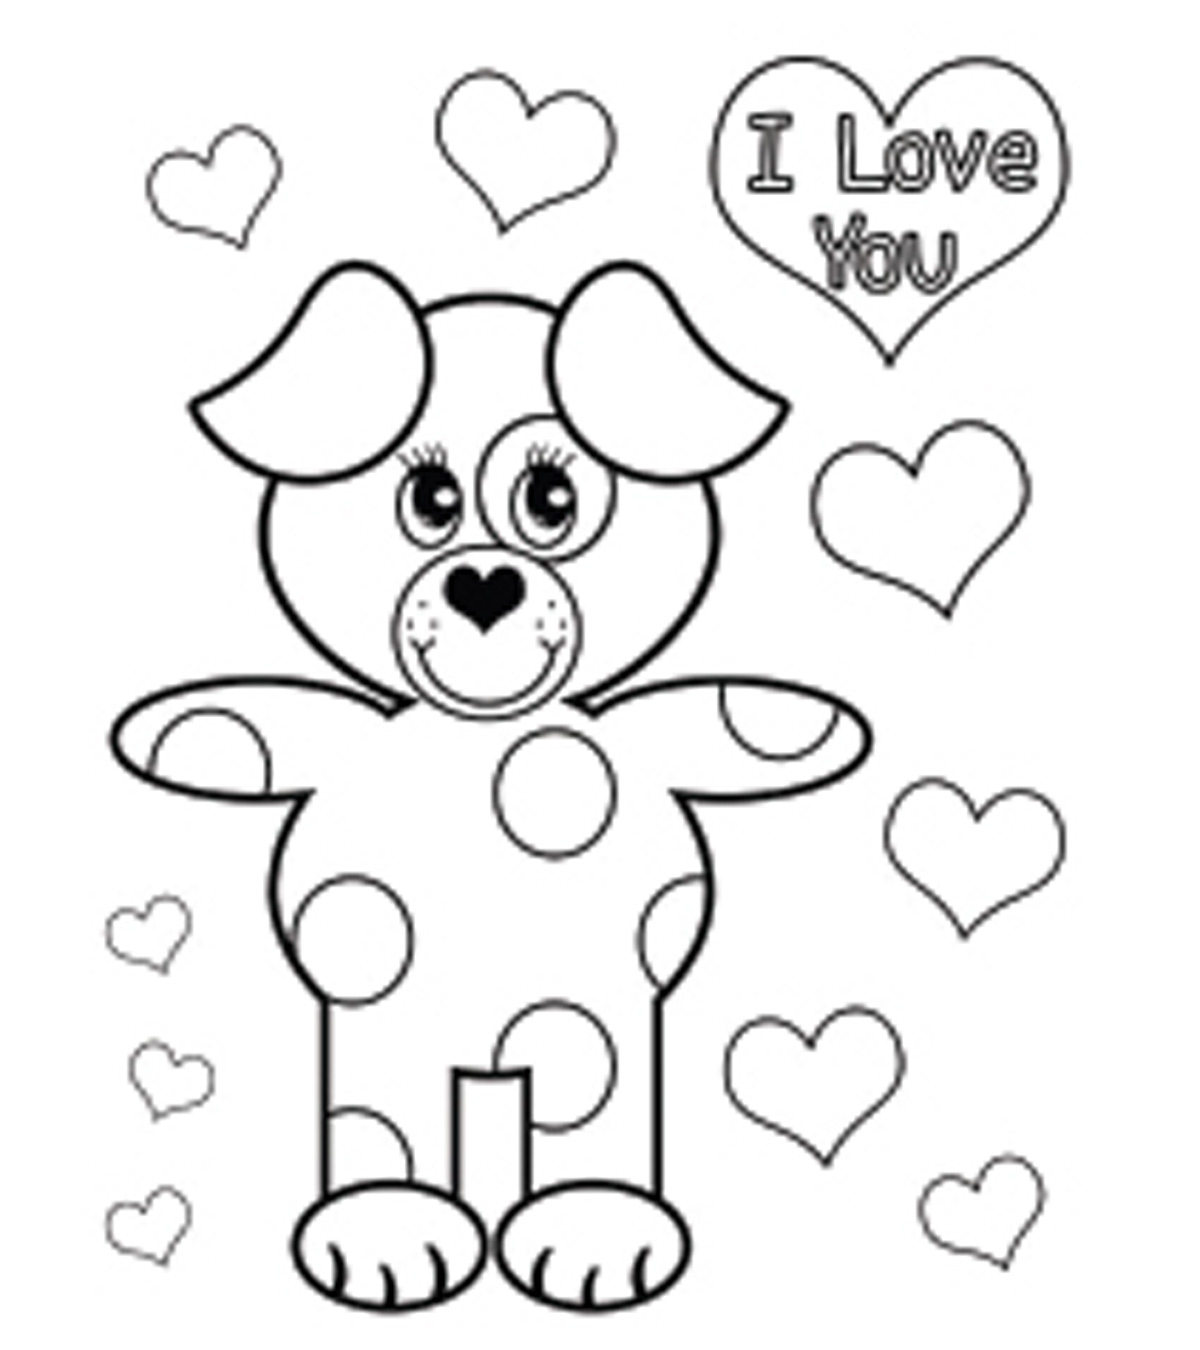 Top 44 Valentine’s Day Coloring Pages For Your Little Ones